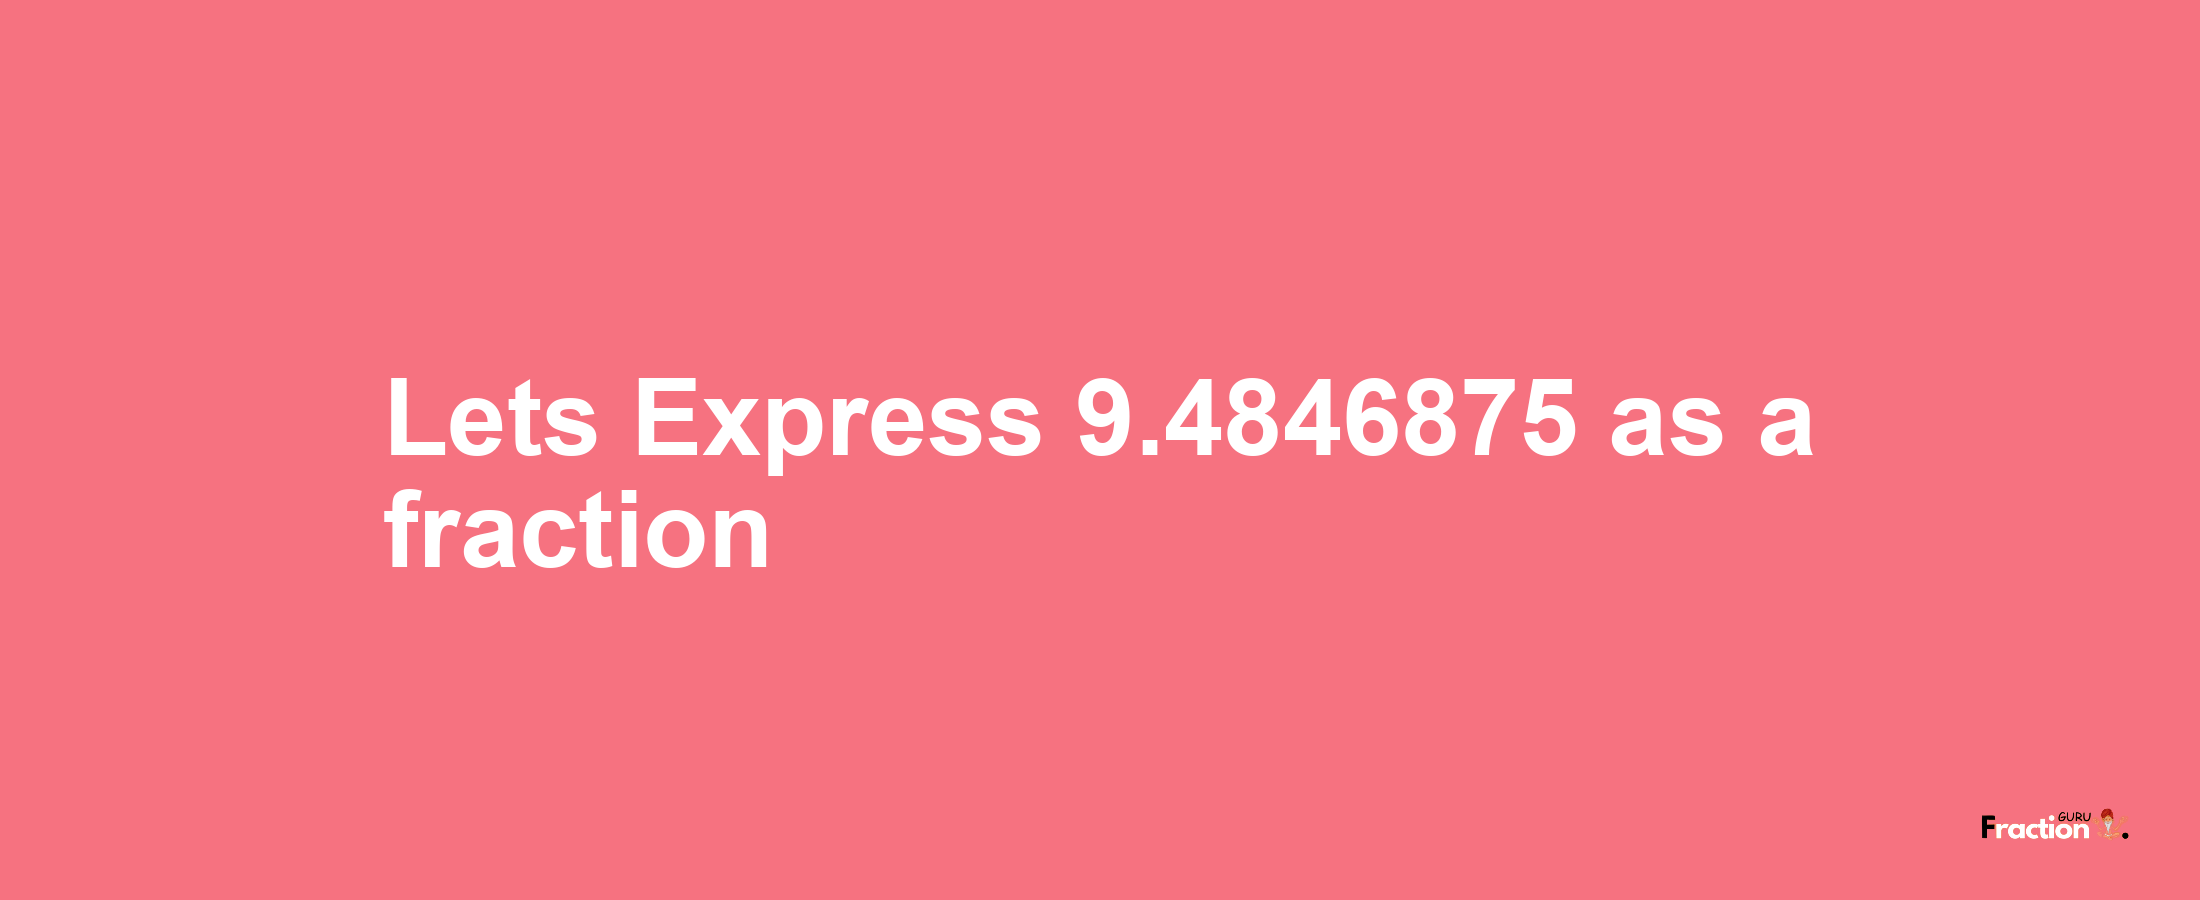 Lets Express 9.4846875 as afraction